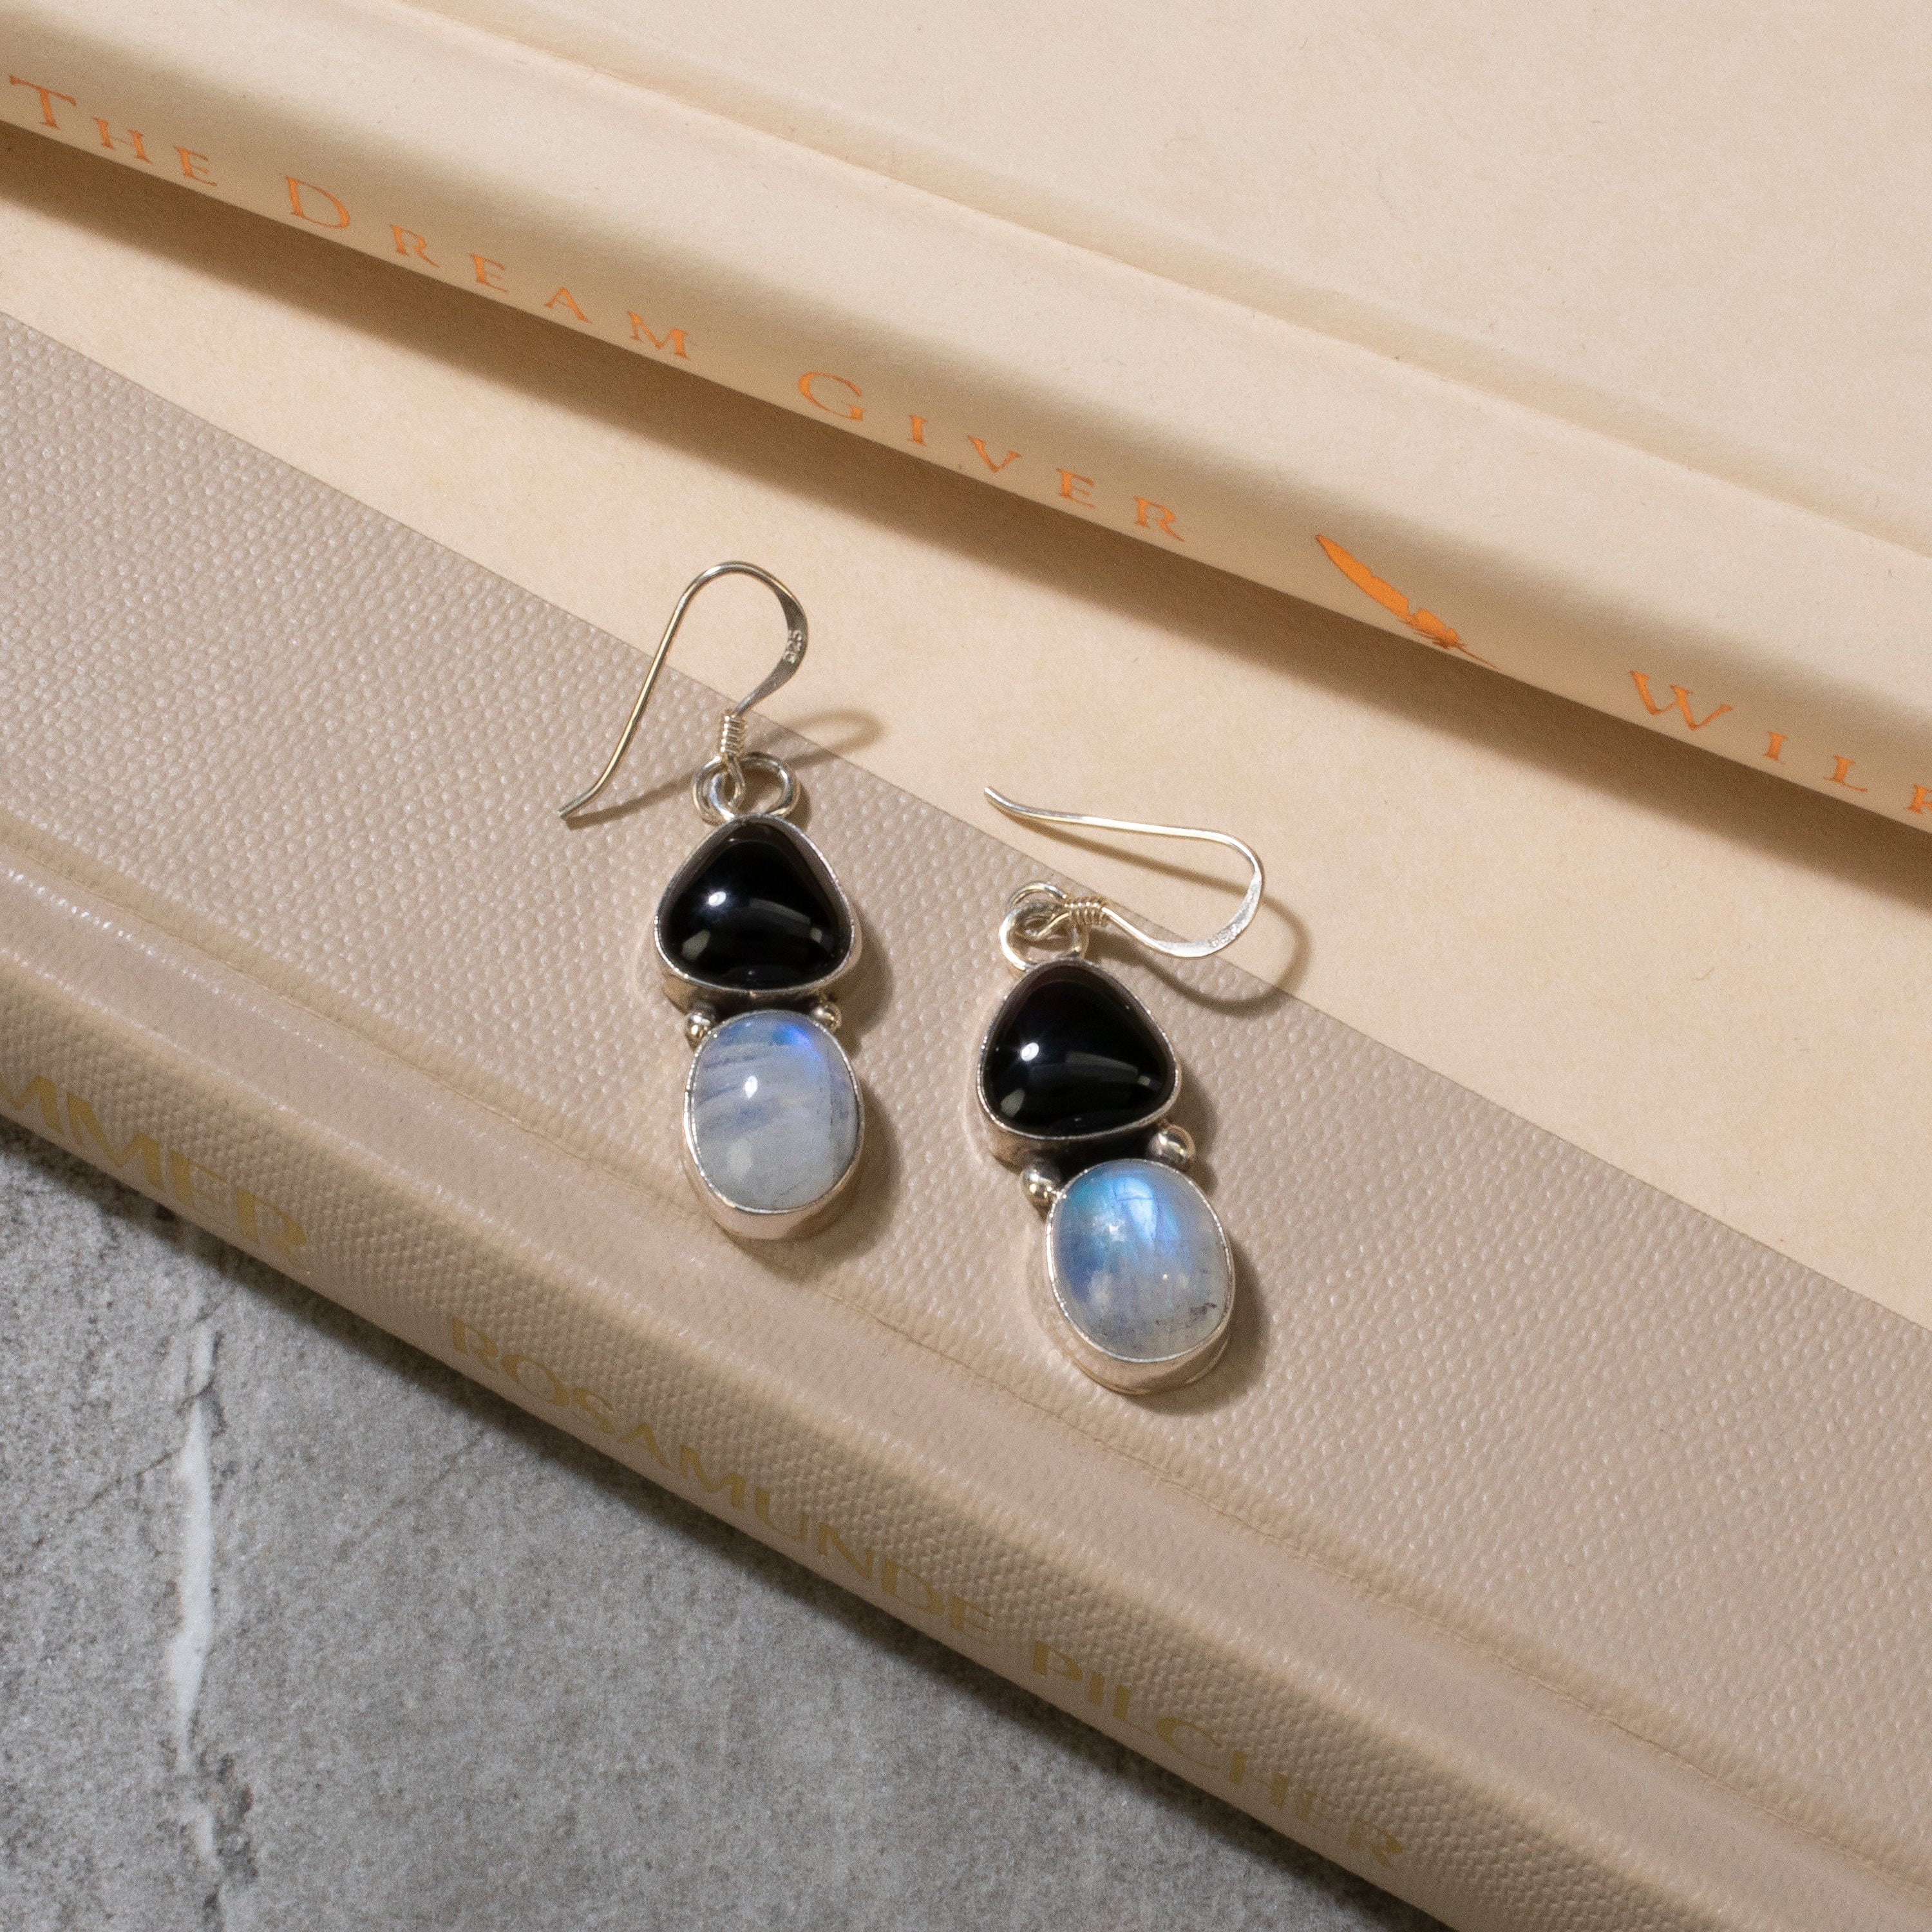 Kalifano Native American Jewelry Moonstone & Black Opal Dangle USA Native American Made 925 Sterling Silver Earrings with French Hook NAE400.043